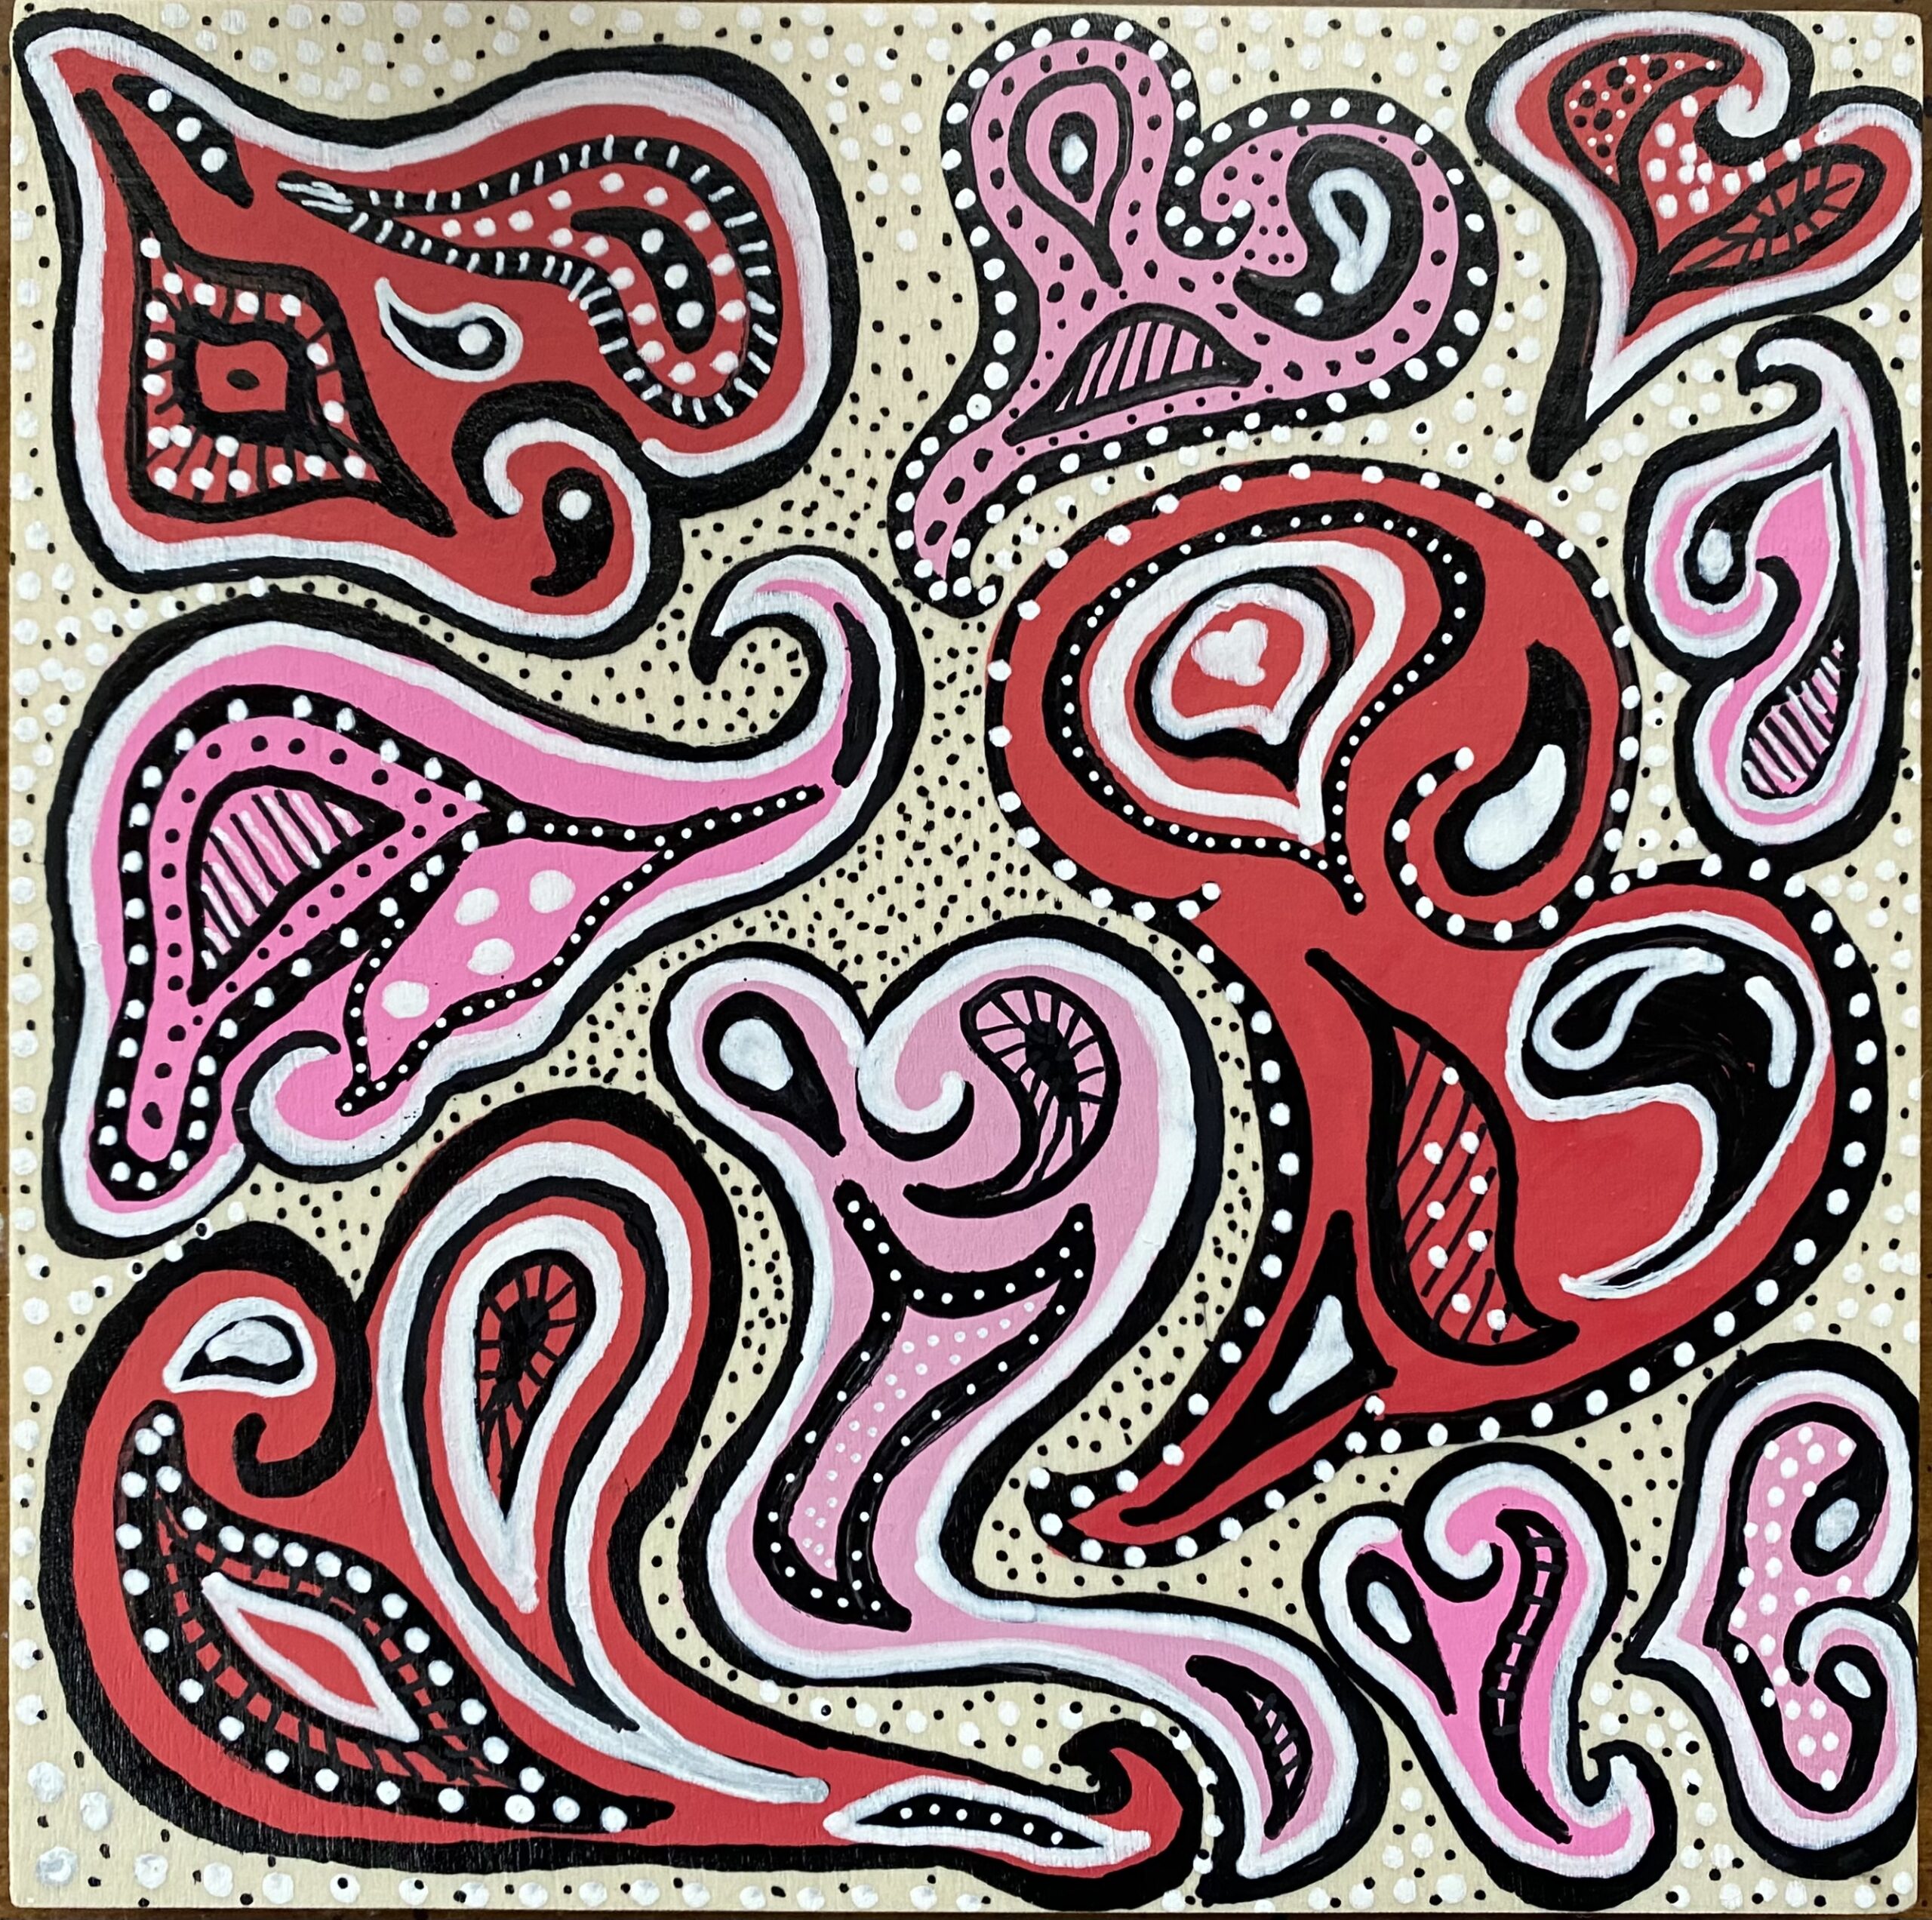 Made for Valentine’s Day. Red, pink and white heart shape fractals swirl around the canvas. 